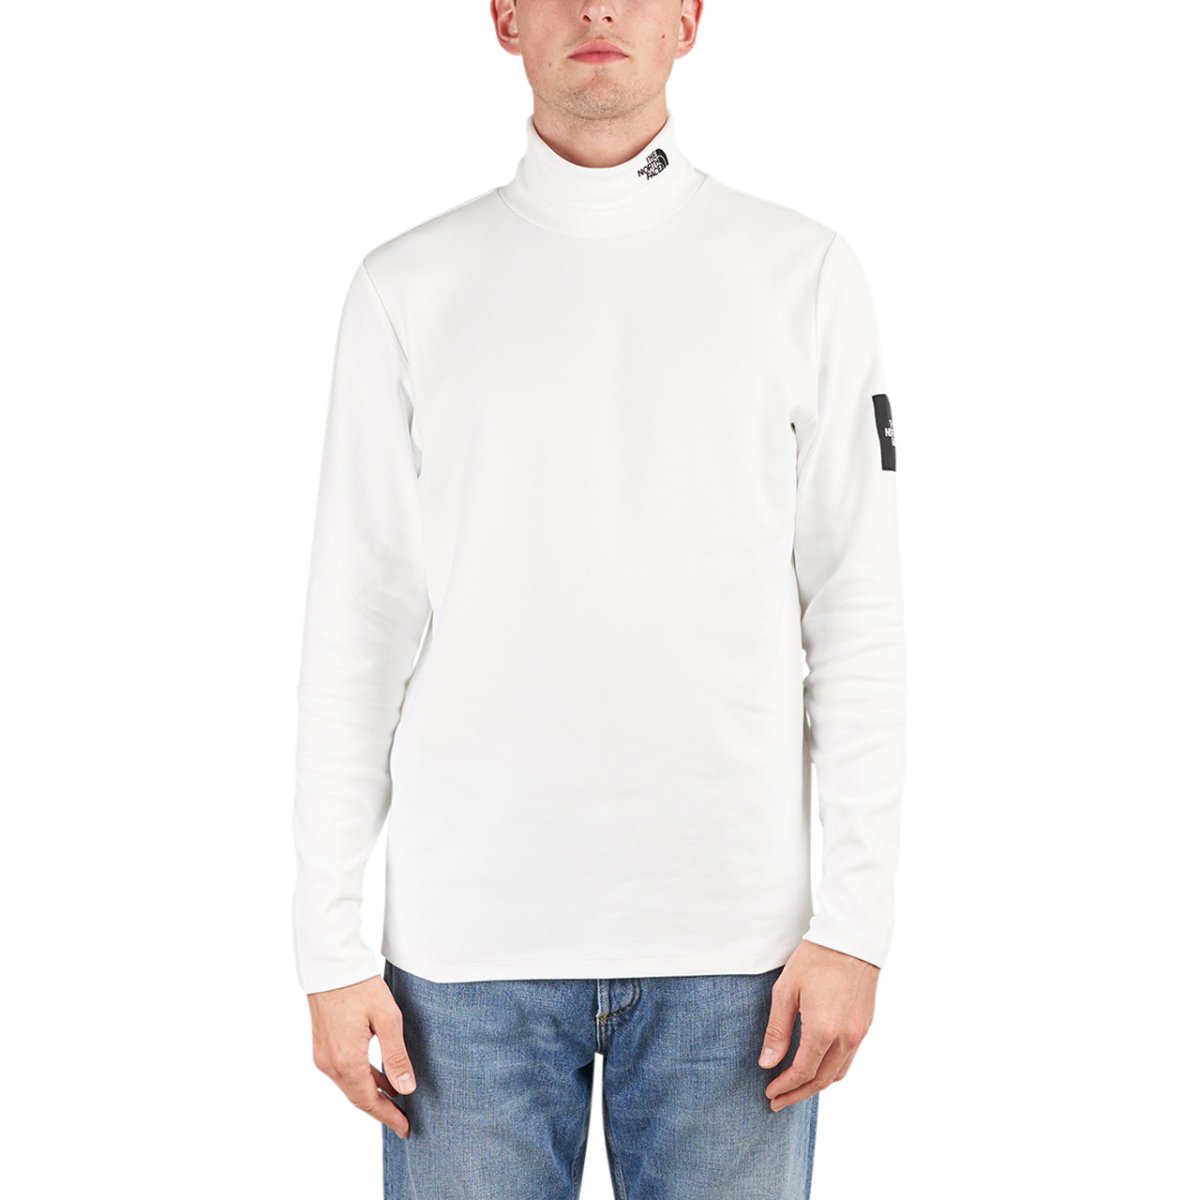 The North Face BB LST DNC Longsleeve (Weiß)  - Allike Store